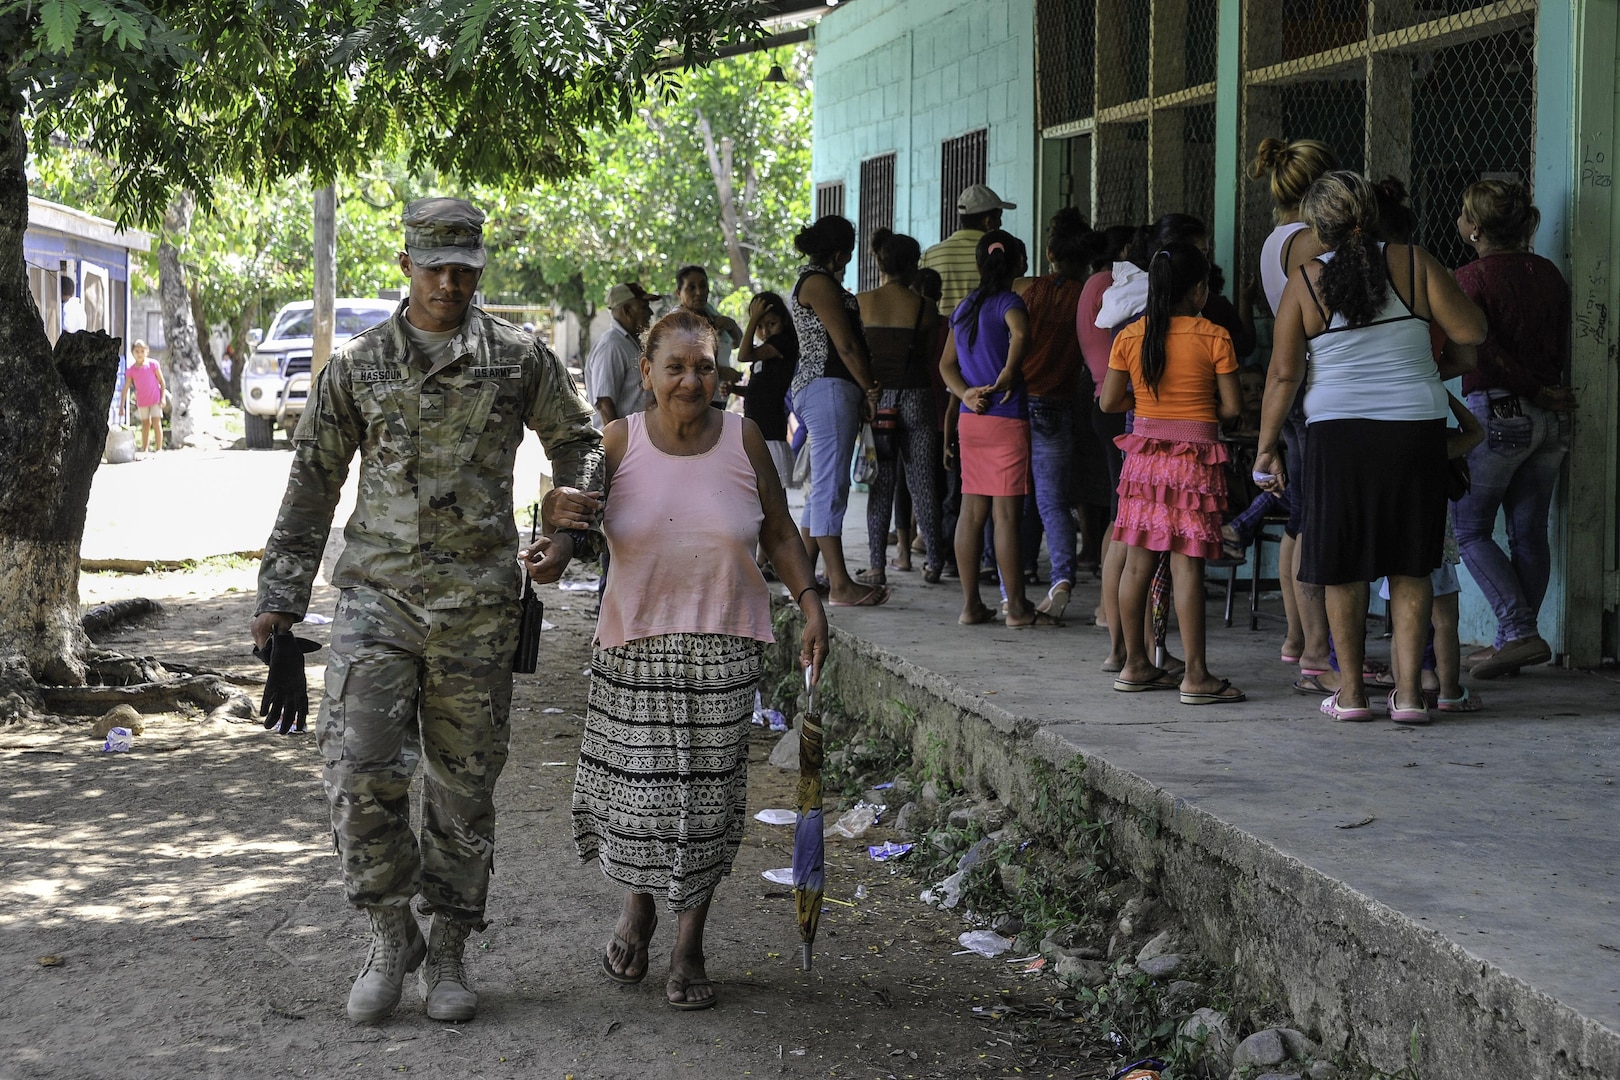 U.S. Army Pvt. Gabriel Hassoun, Joint Task Force-Bravo Army Forces, walks with an elderly woman during a Medical Readiness Training Exercise operation in Trujillo, Honduras, July 29, 2016. While MEDRETEs greatly help the local populations where they are conducted, the service members executing the operations also receive valuable medical training and experience that comes from operating in remote and/or austere environments. (U.S. Air Force photo by Staff Sgt. Siuta B. Ika)